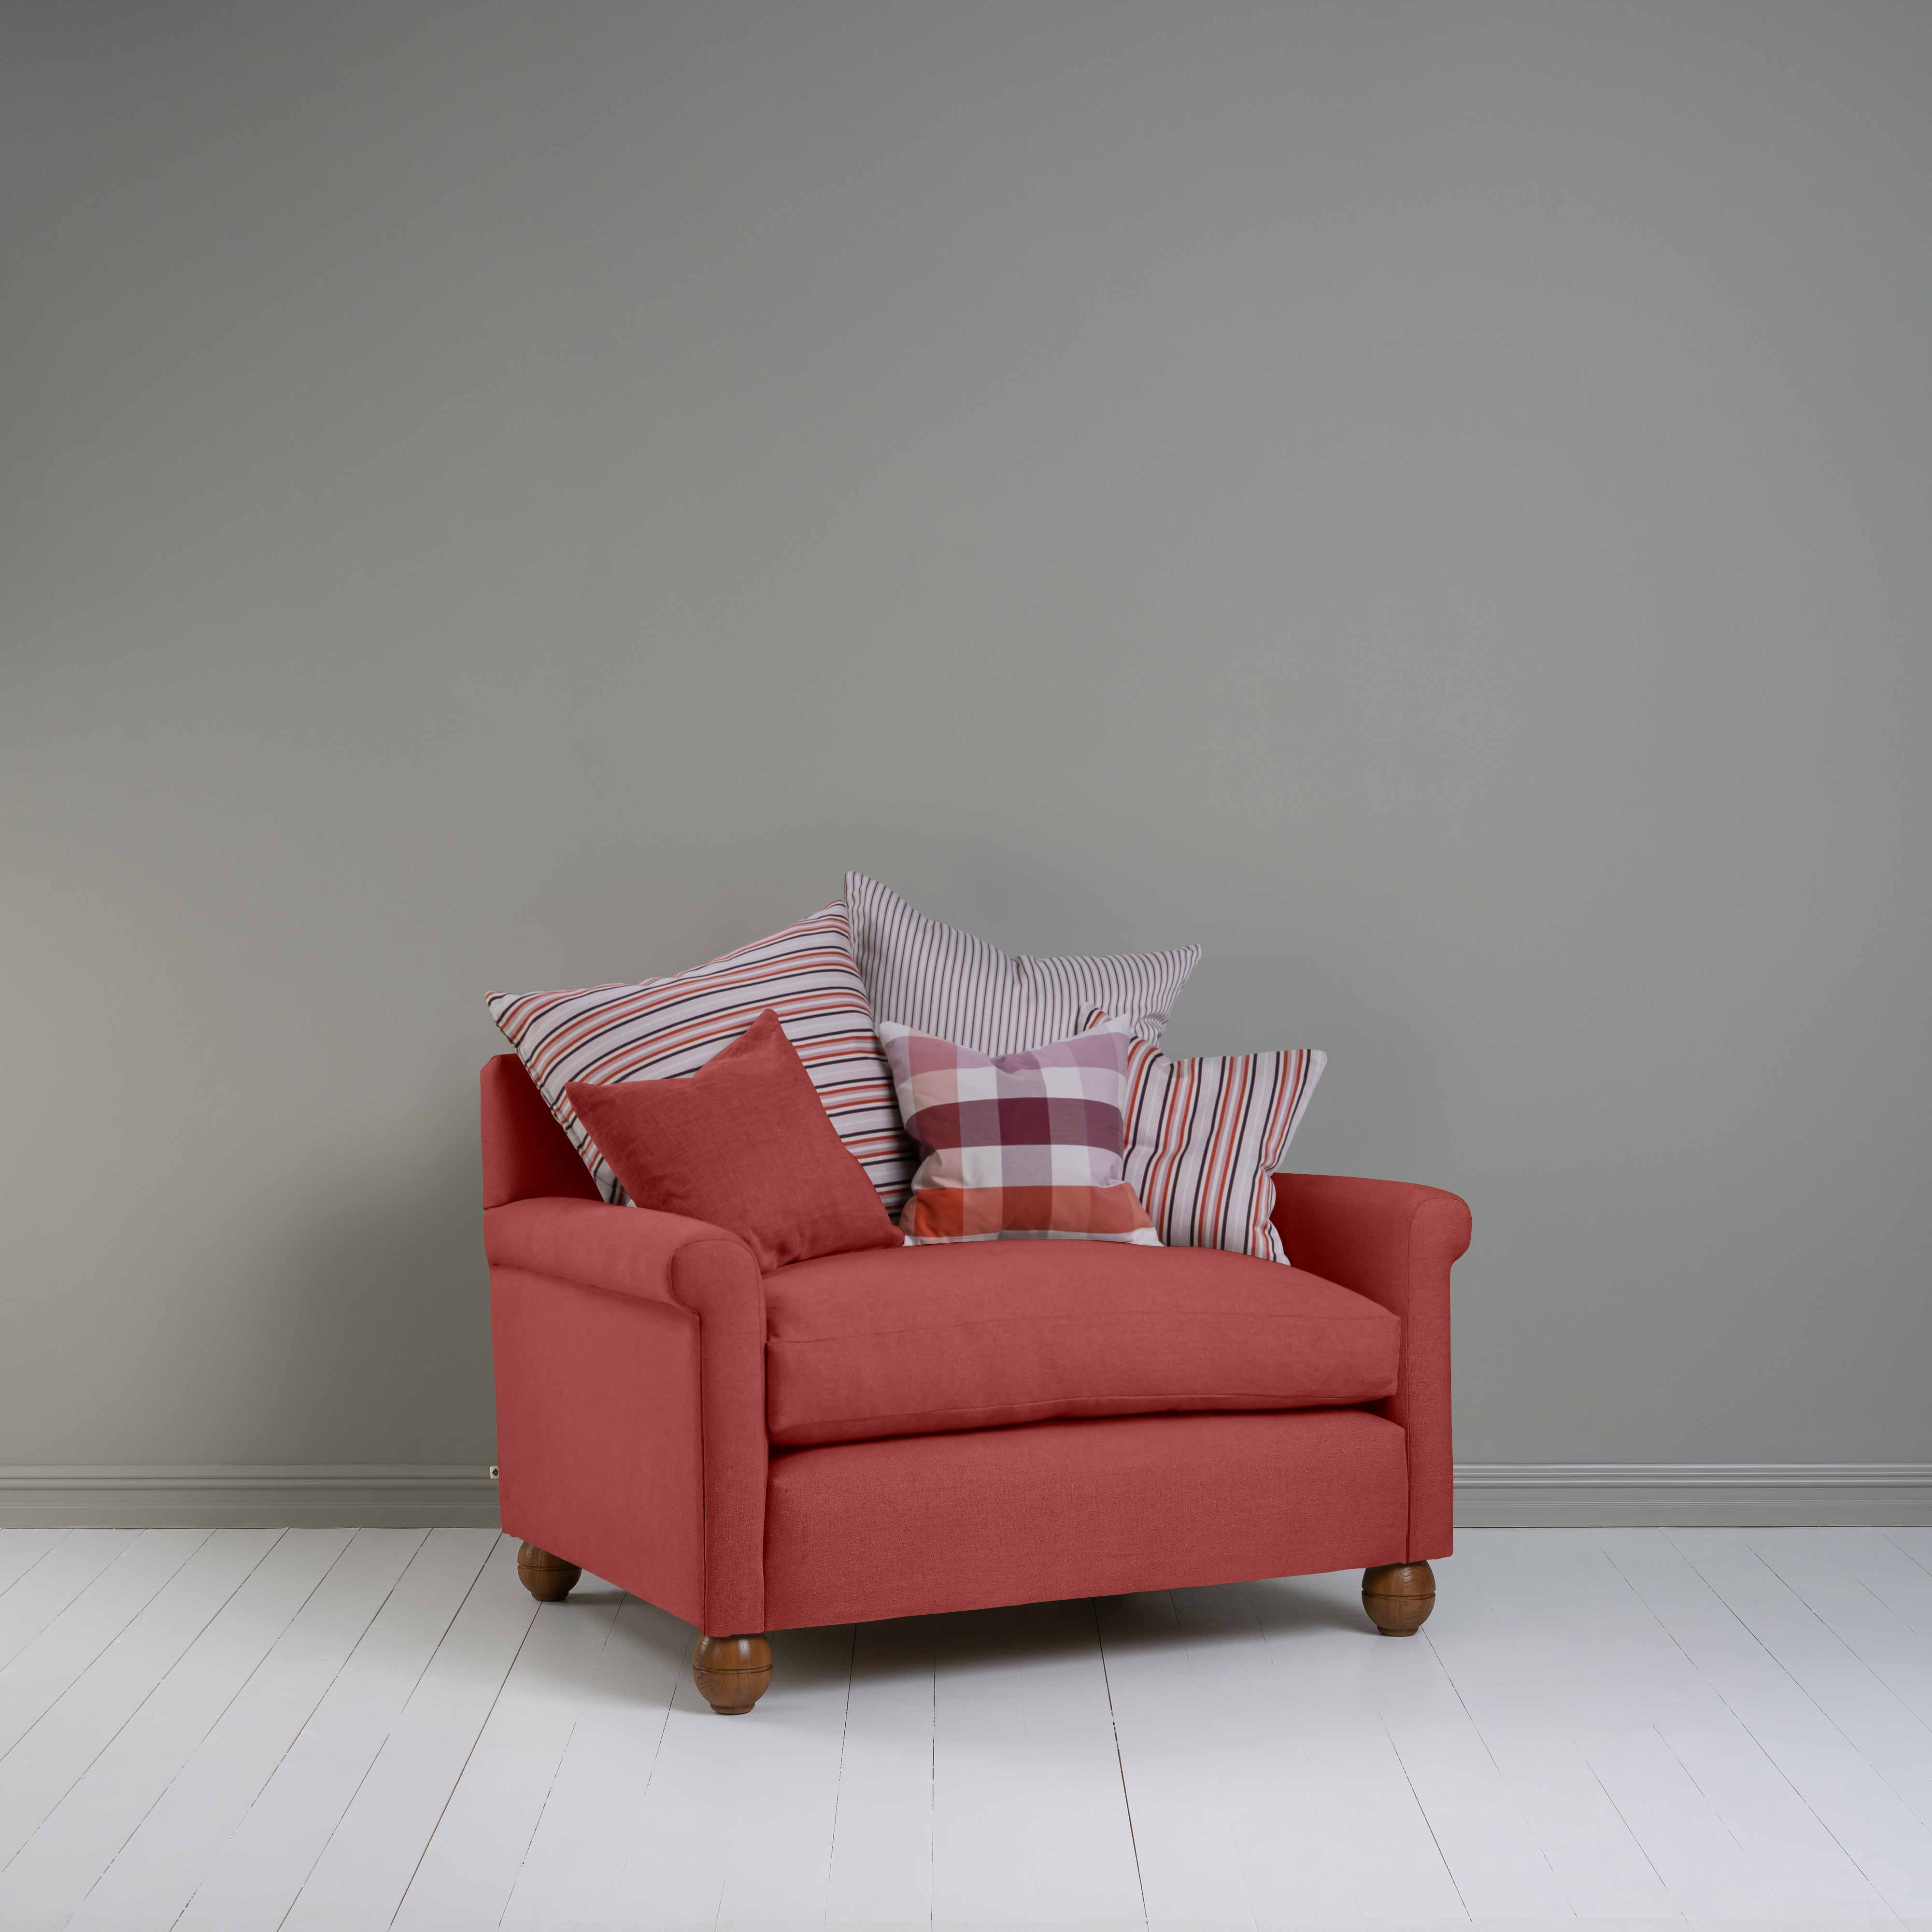  Idler Love Seat in Laidback Linen Rouge 